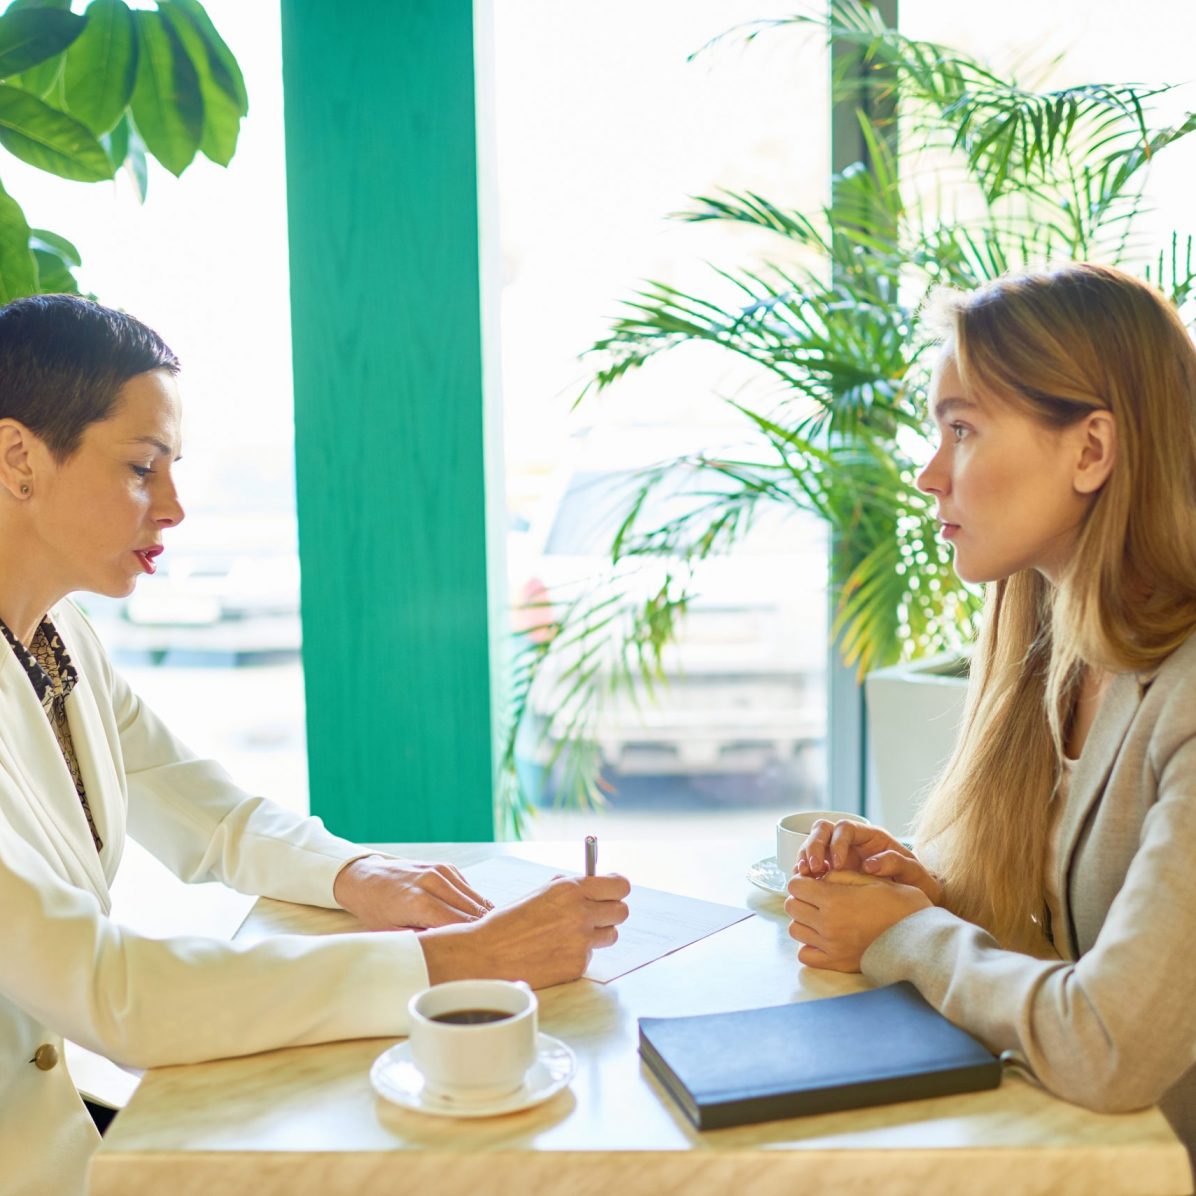 Side view portrait of two modern young women discussing work sitting at table in cafe during business meeting or job interview